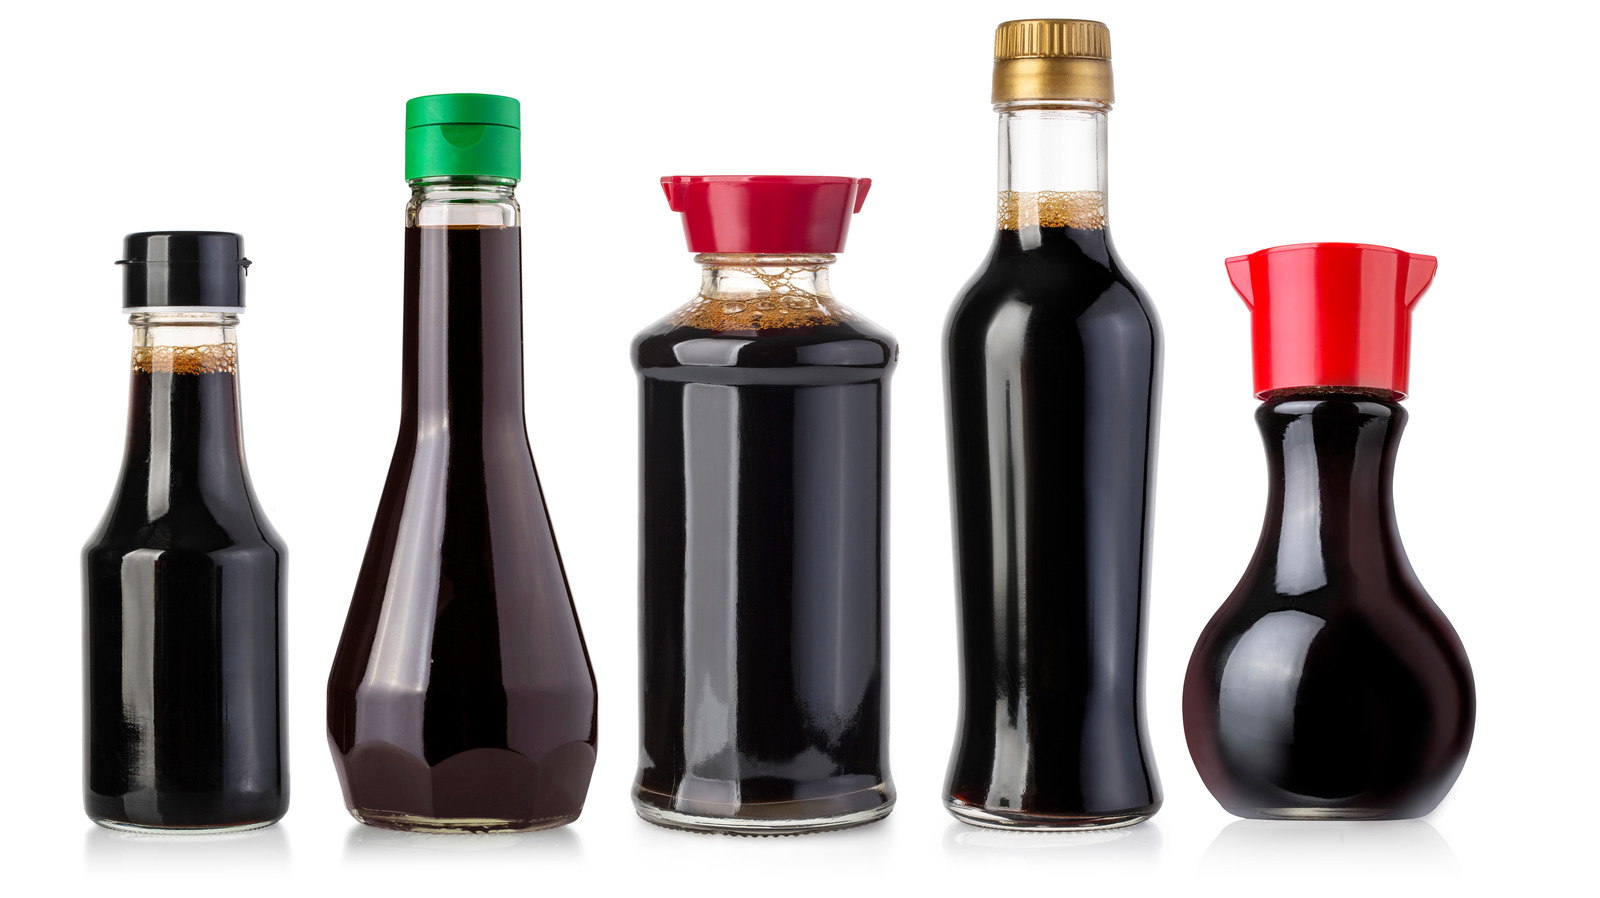 Soy Sauce Dark Sauce: What's Difference?